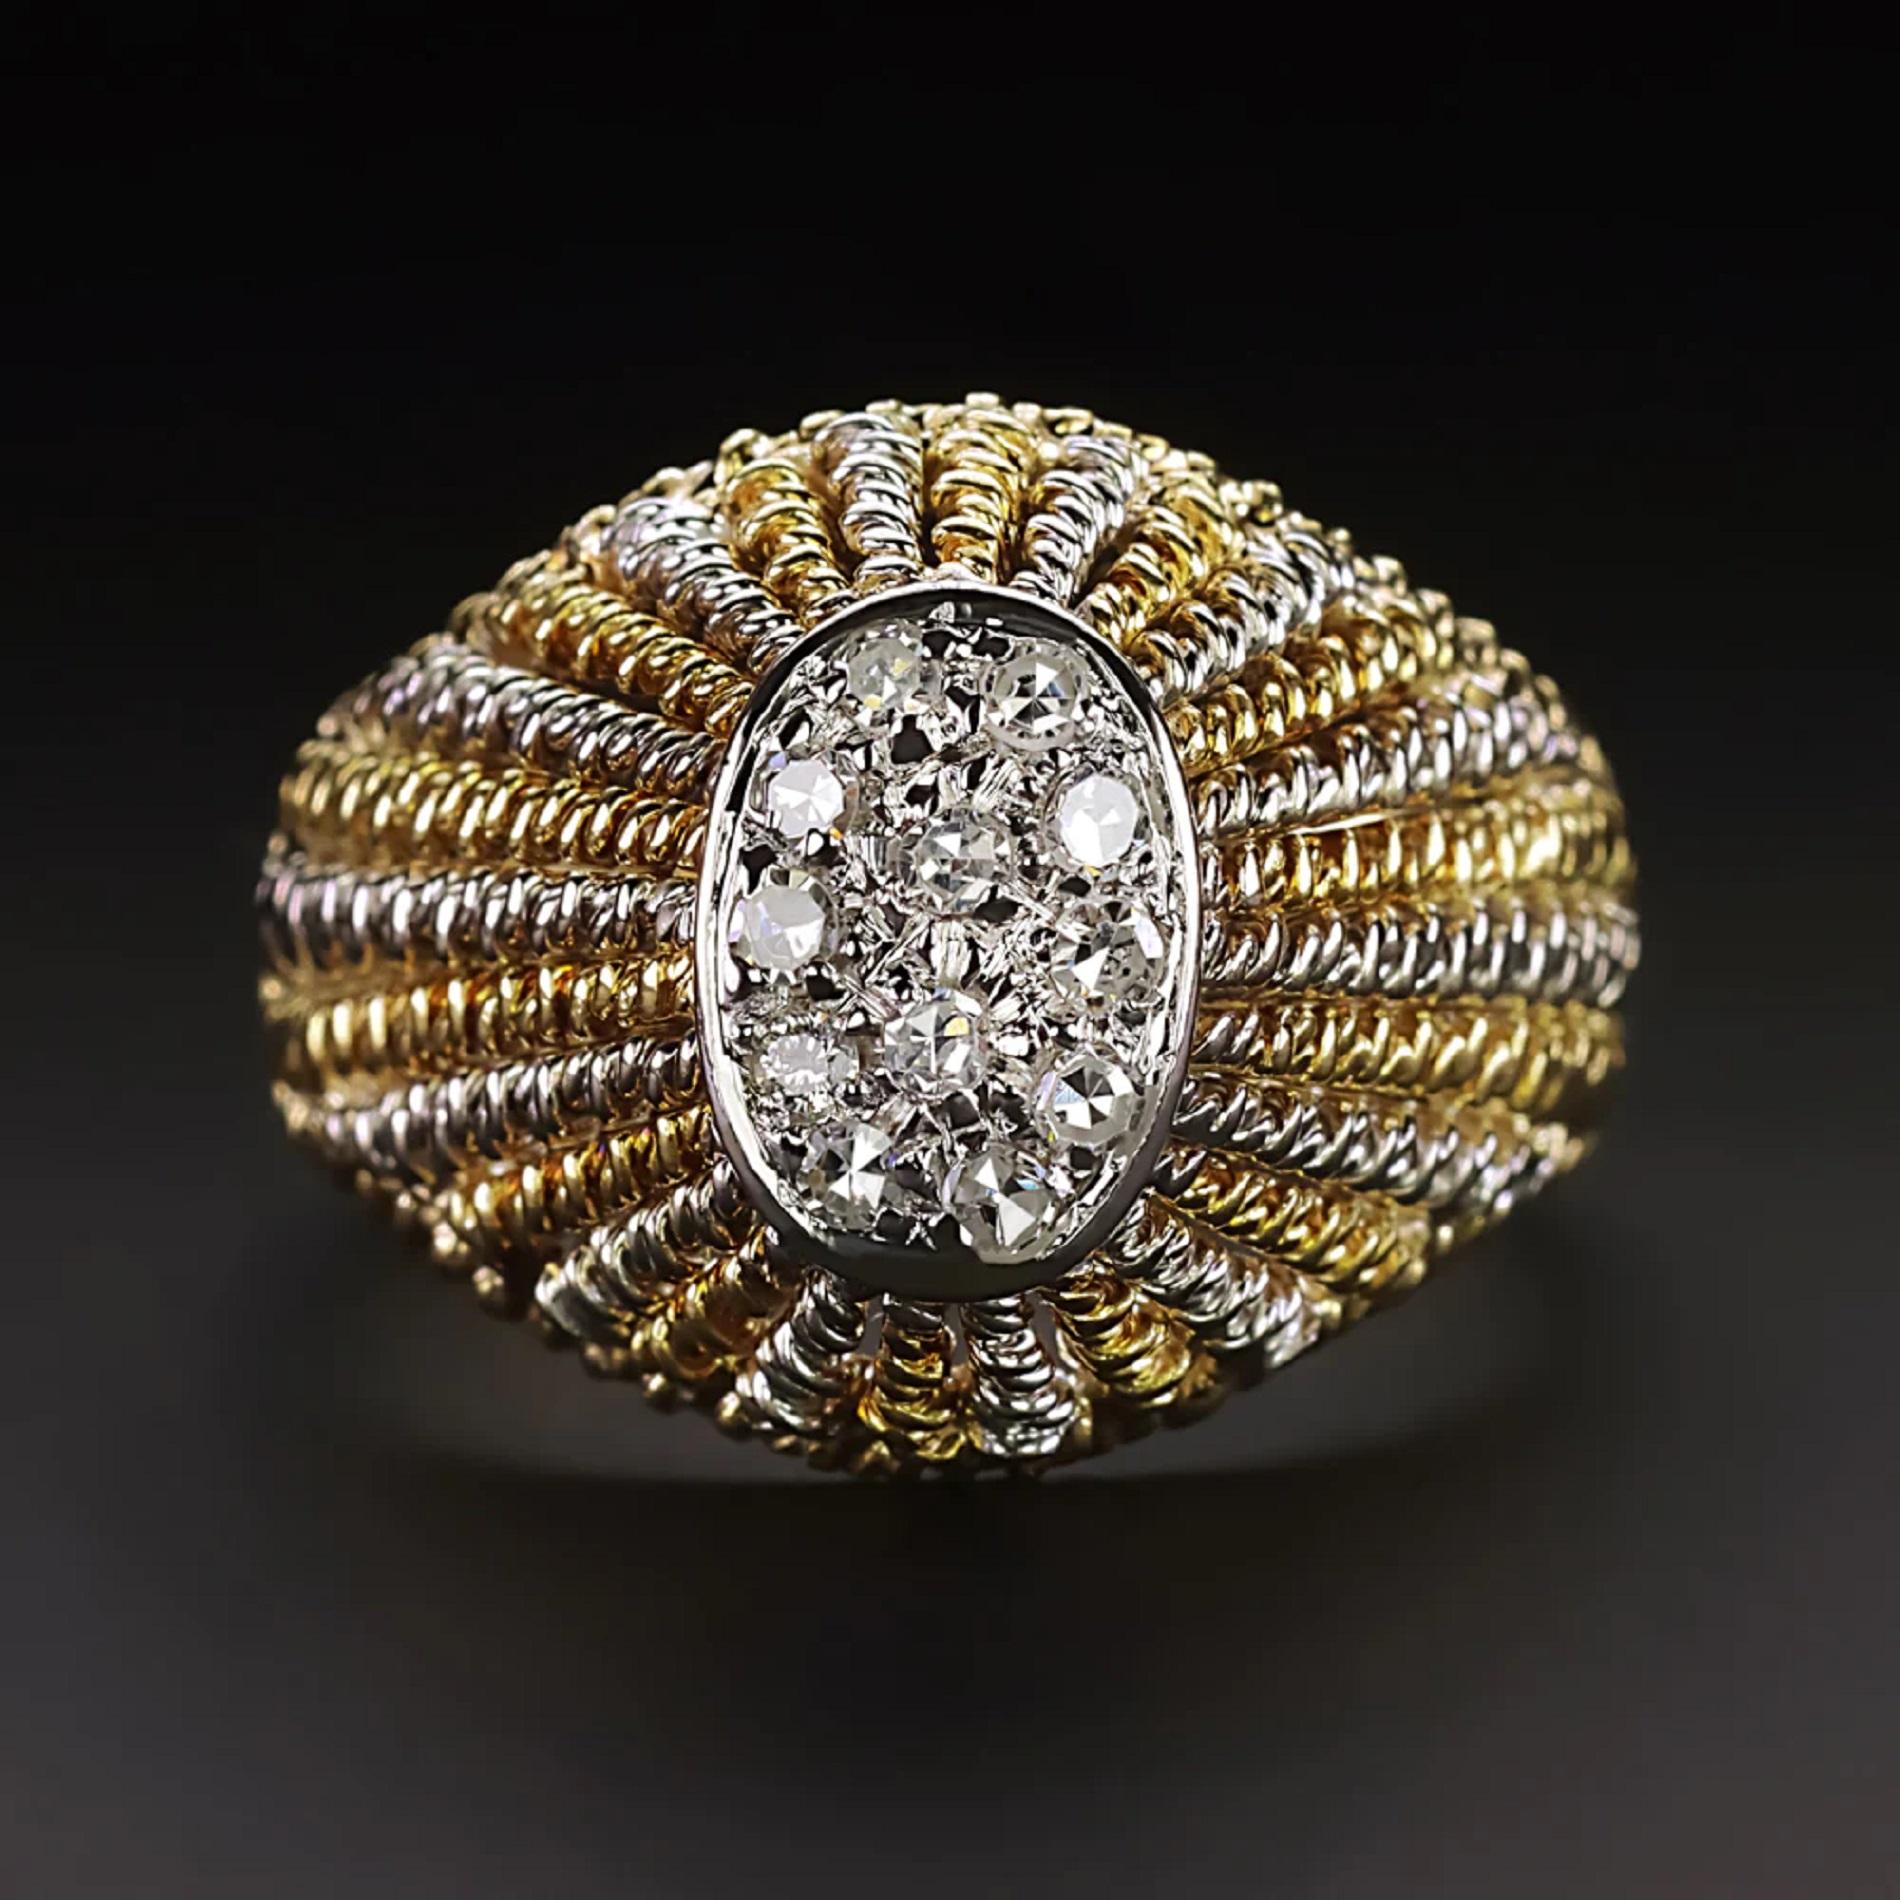 This vintage diamond ring is a fantastic, one of a kind piece! The hand perfected details are absolutely stunning! Truly, a masterful work of art.

Highlights:

- Original vintage

- 0.18ct of high quality diamonds

- Bright white and exceptionally